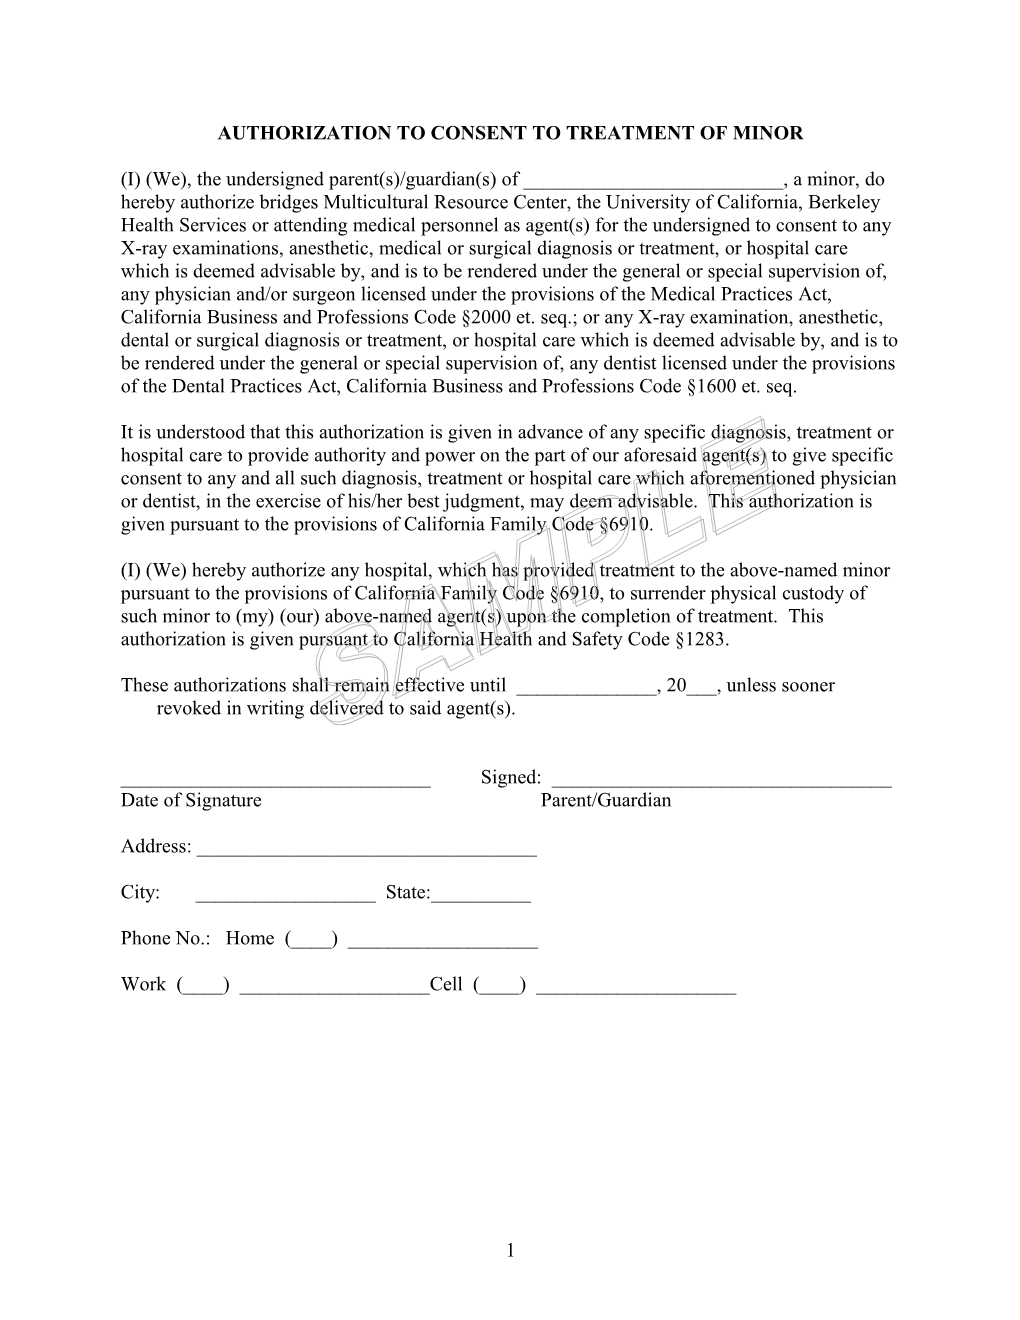 Authorization to Consent to Treatment of Minor